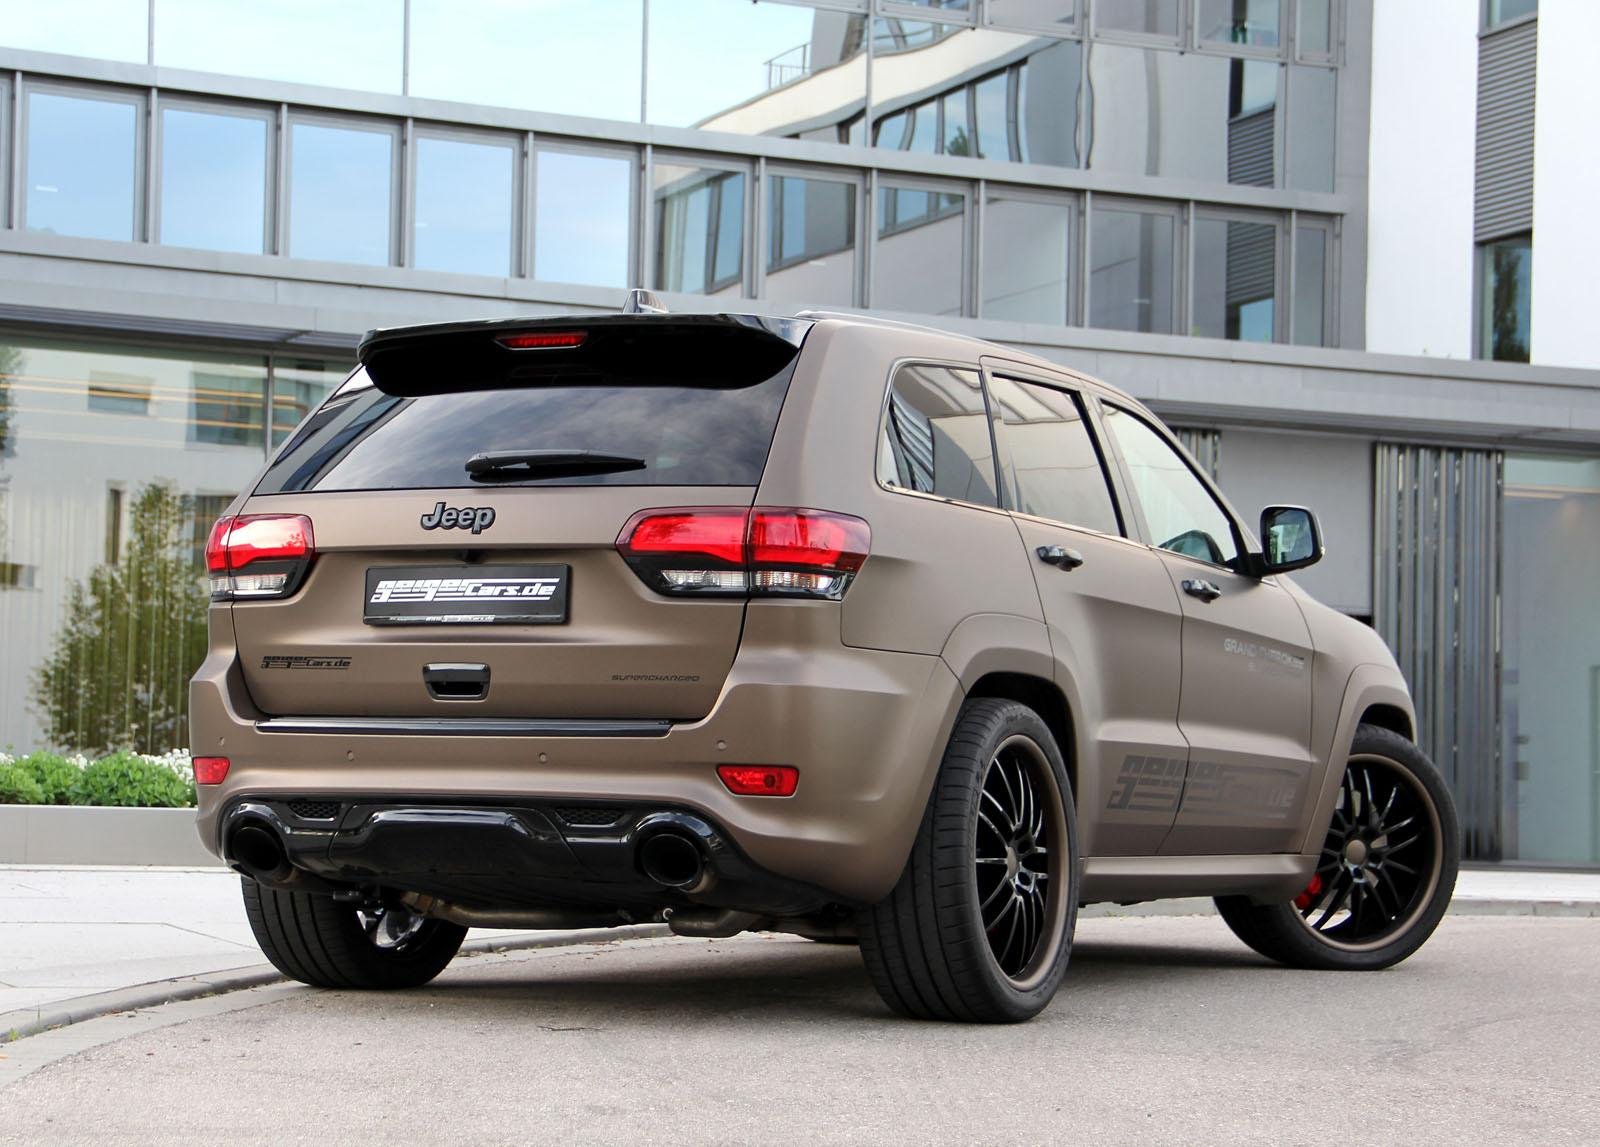 Jeep Grand Cherokee Srt Cars All Road Modified Tuning Wallpaper